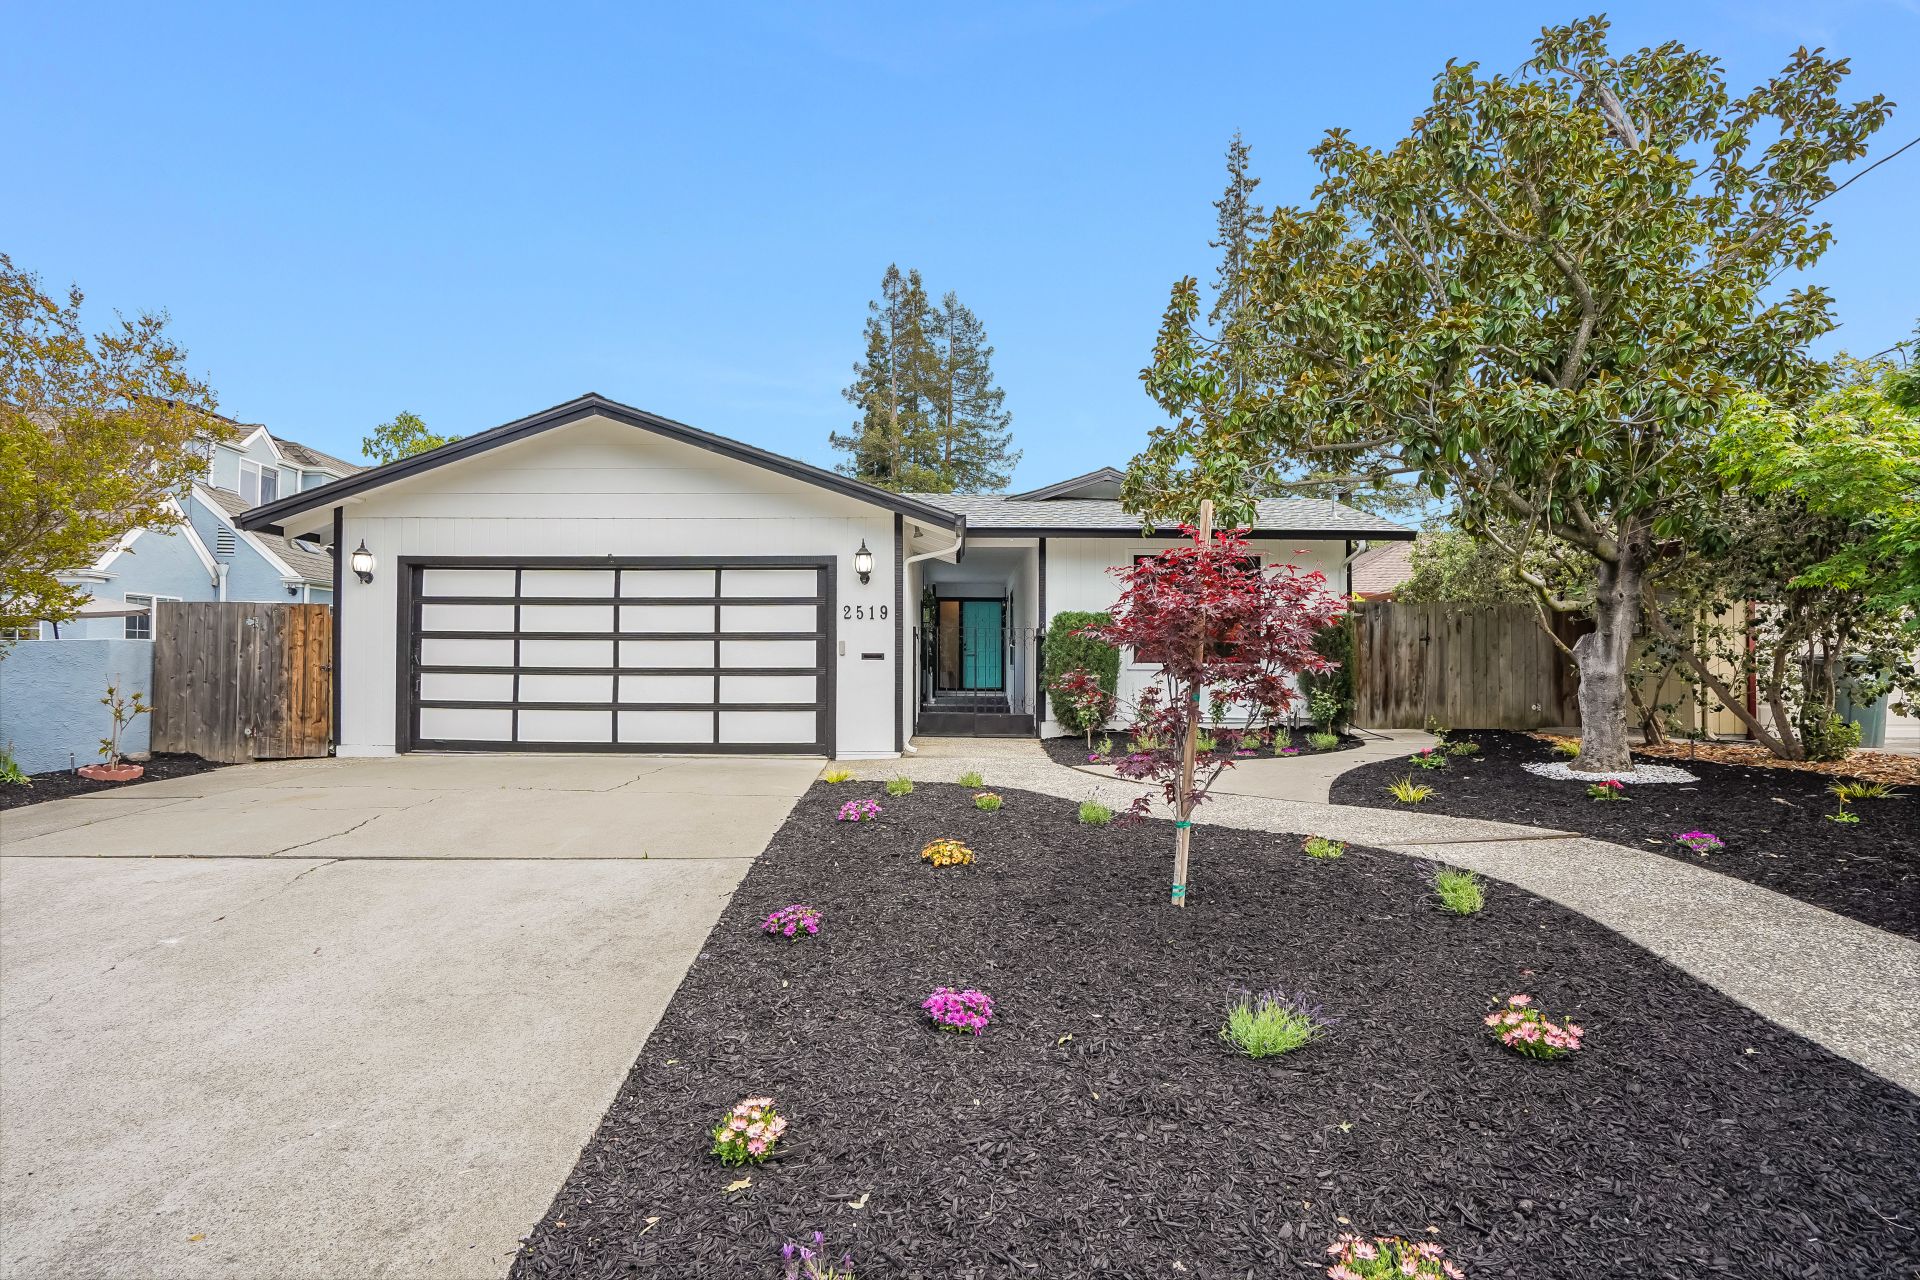 Just Listed! 2519 Whipple Ave, Redwood City, CA (3 Beds, 2 Baths, 1,850 SQFT)